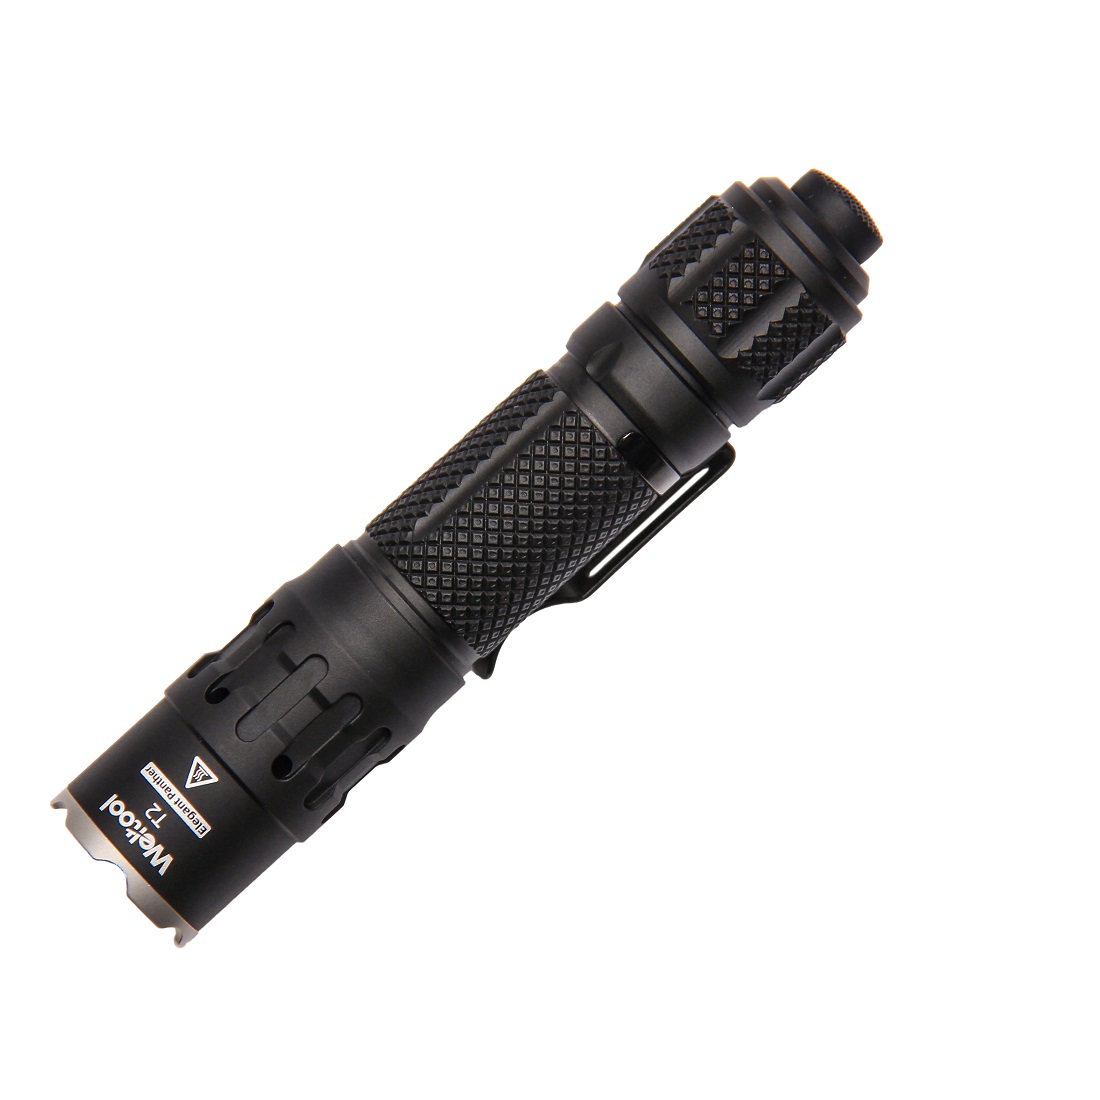 Weltool-T2-quotElegant-Pantherquot-1730LM-Compact-EDC-Tactical-Flashlight-Come-with-18650-Battery-Mi-1962931-3